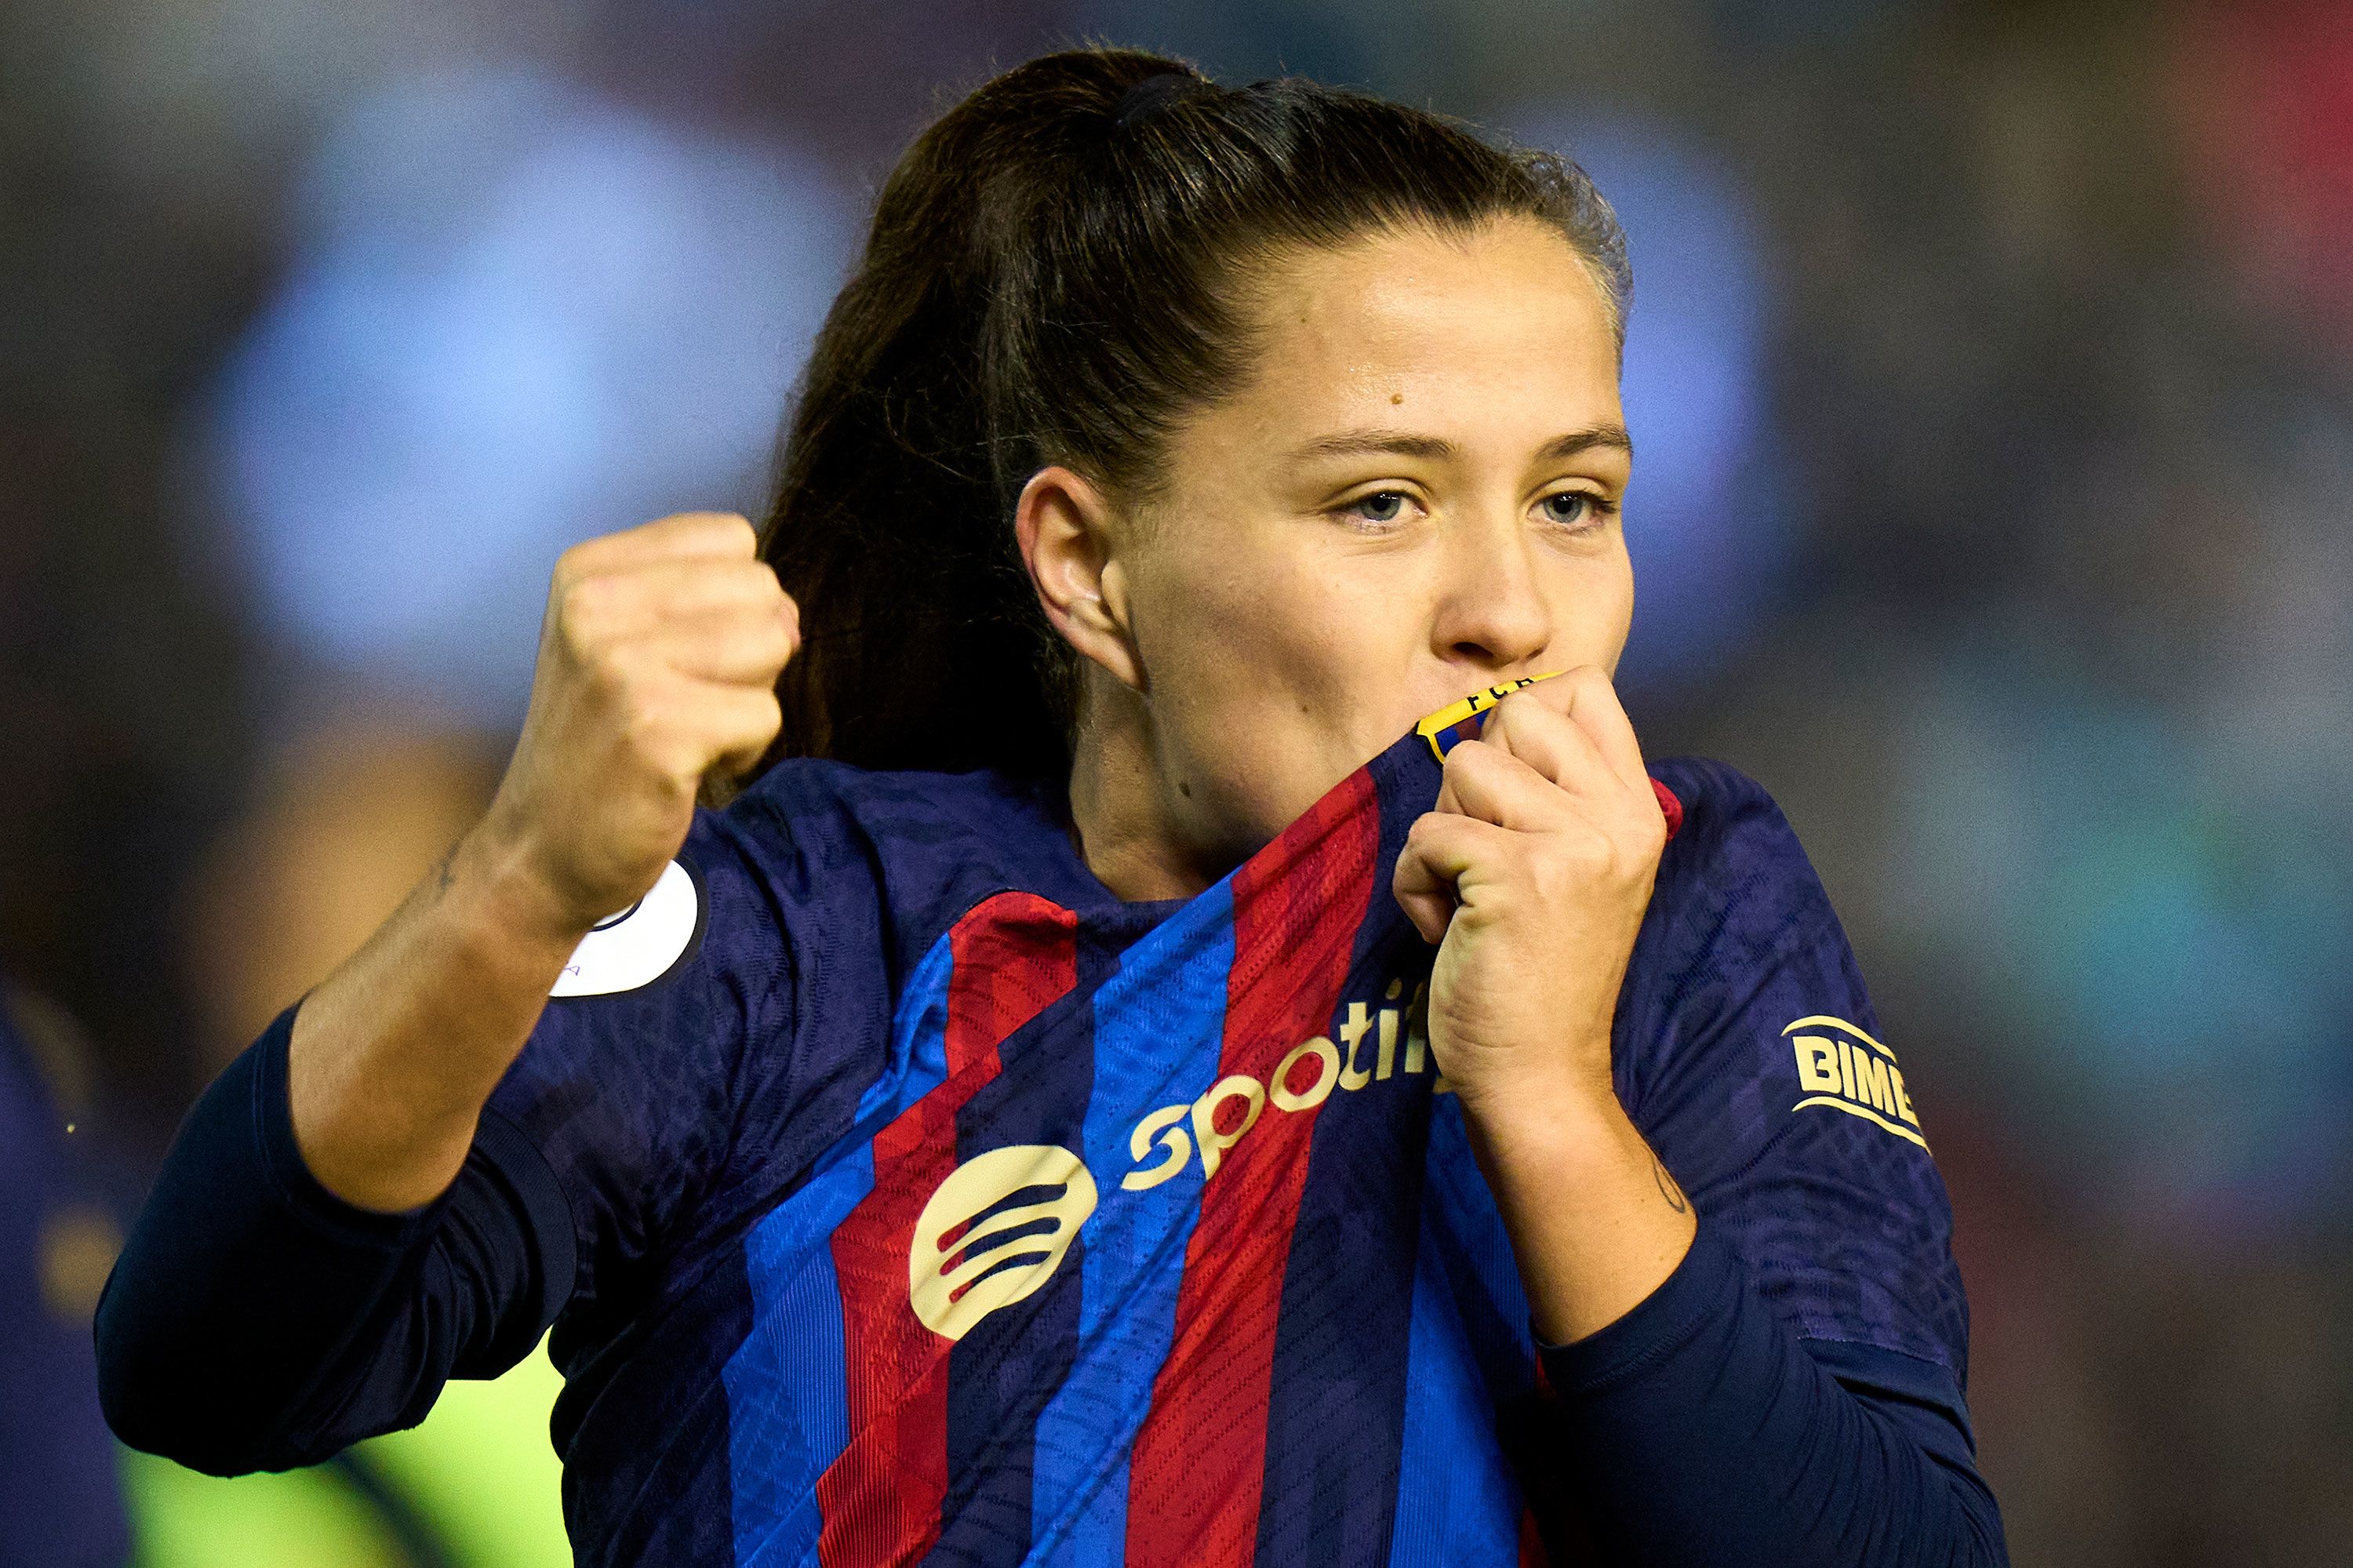 Barcelona Femeni's rise to become the world's most dominant club - Sports  Illustrated